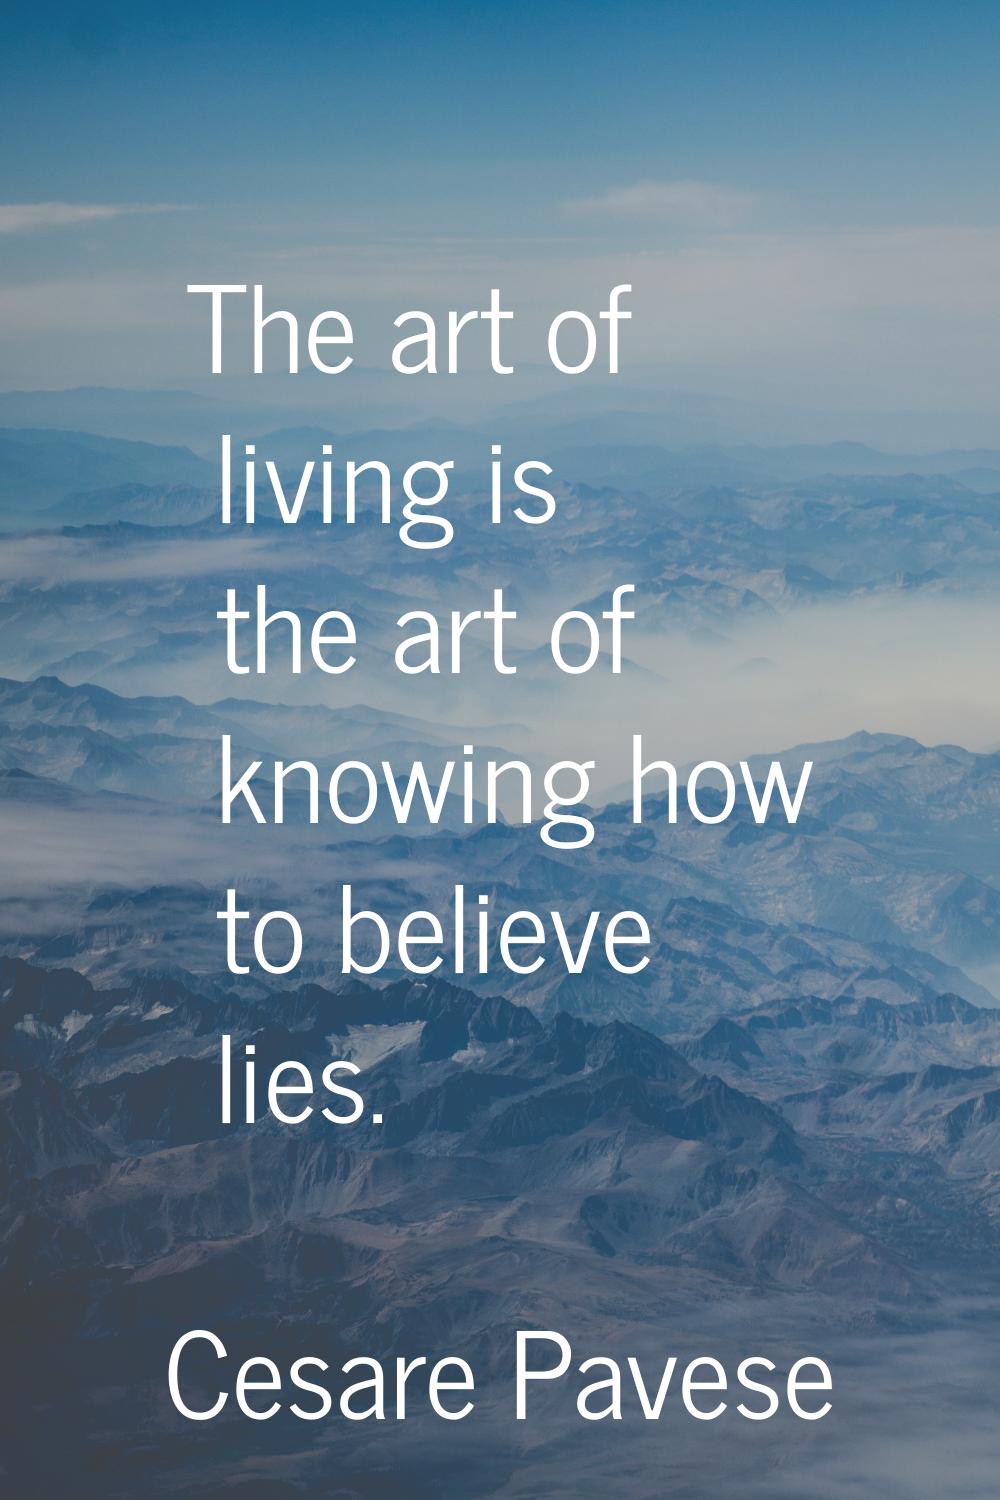 The art of living is the art of knowing how to believe lies.